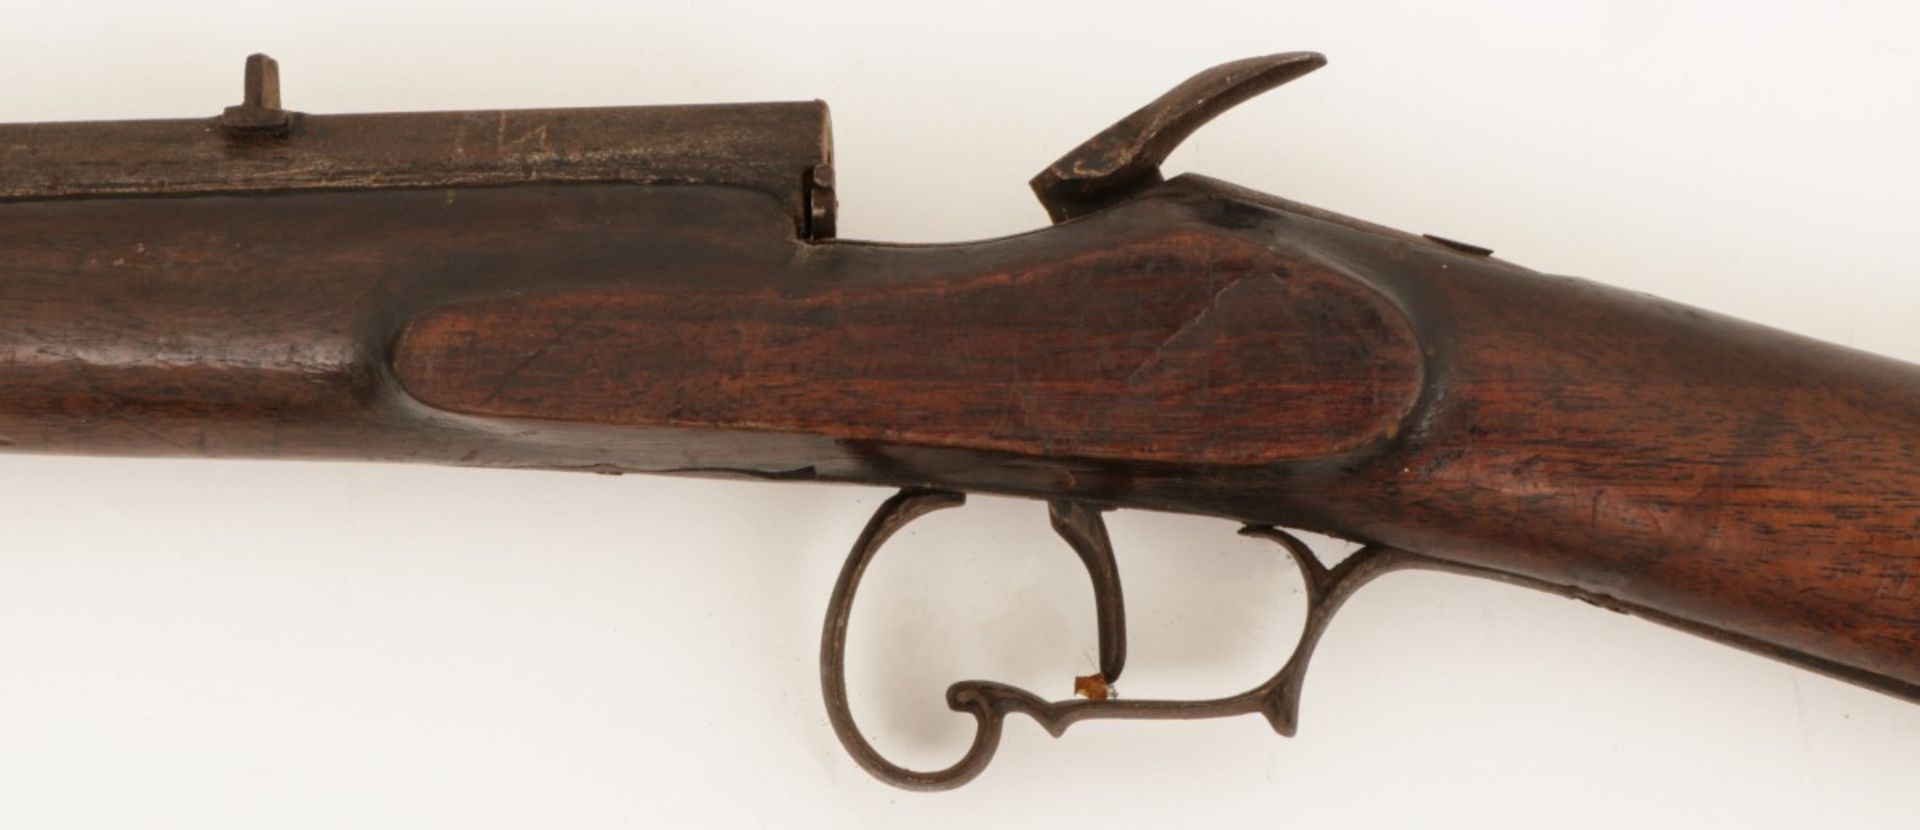 A Flobert-system rifle, France or Belgium, ca. 1900. - Image 2 of 2